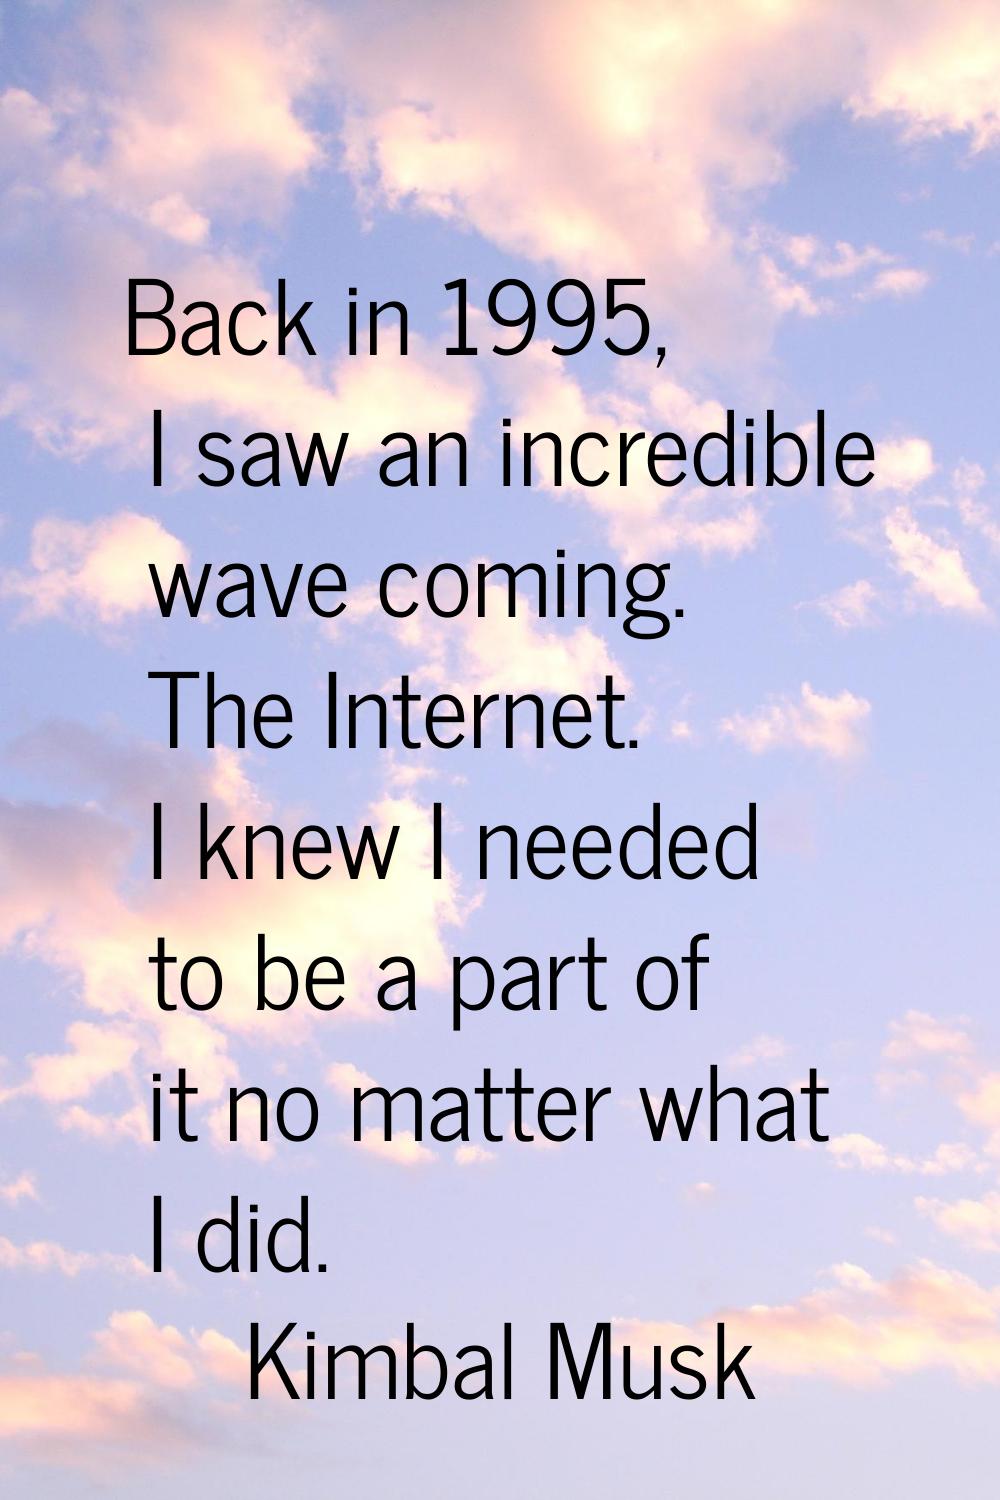 Back in 1995, I saw an incredible wave coming. The Internet. I knew I needed to be a part of it no 